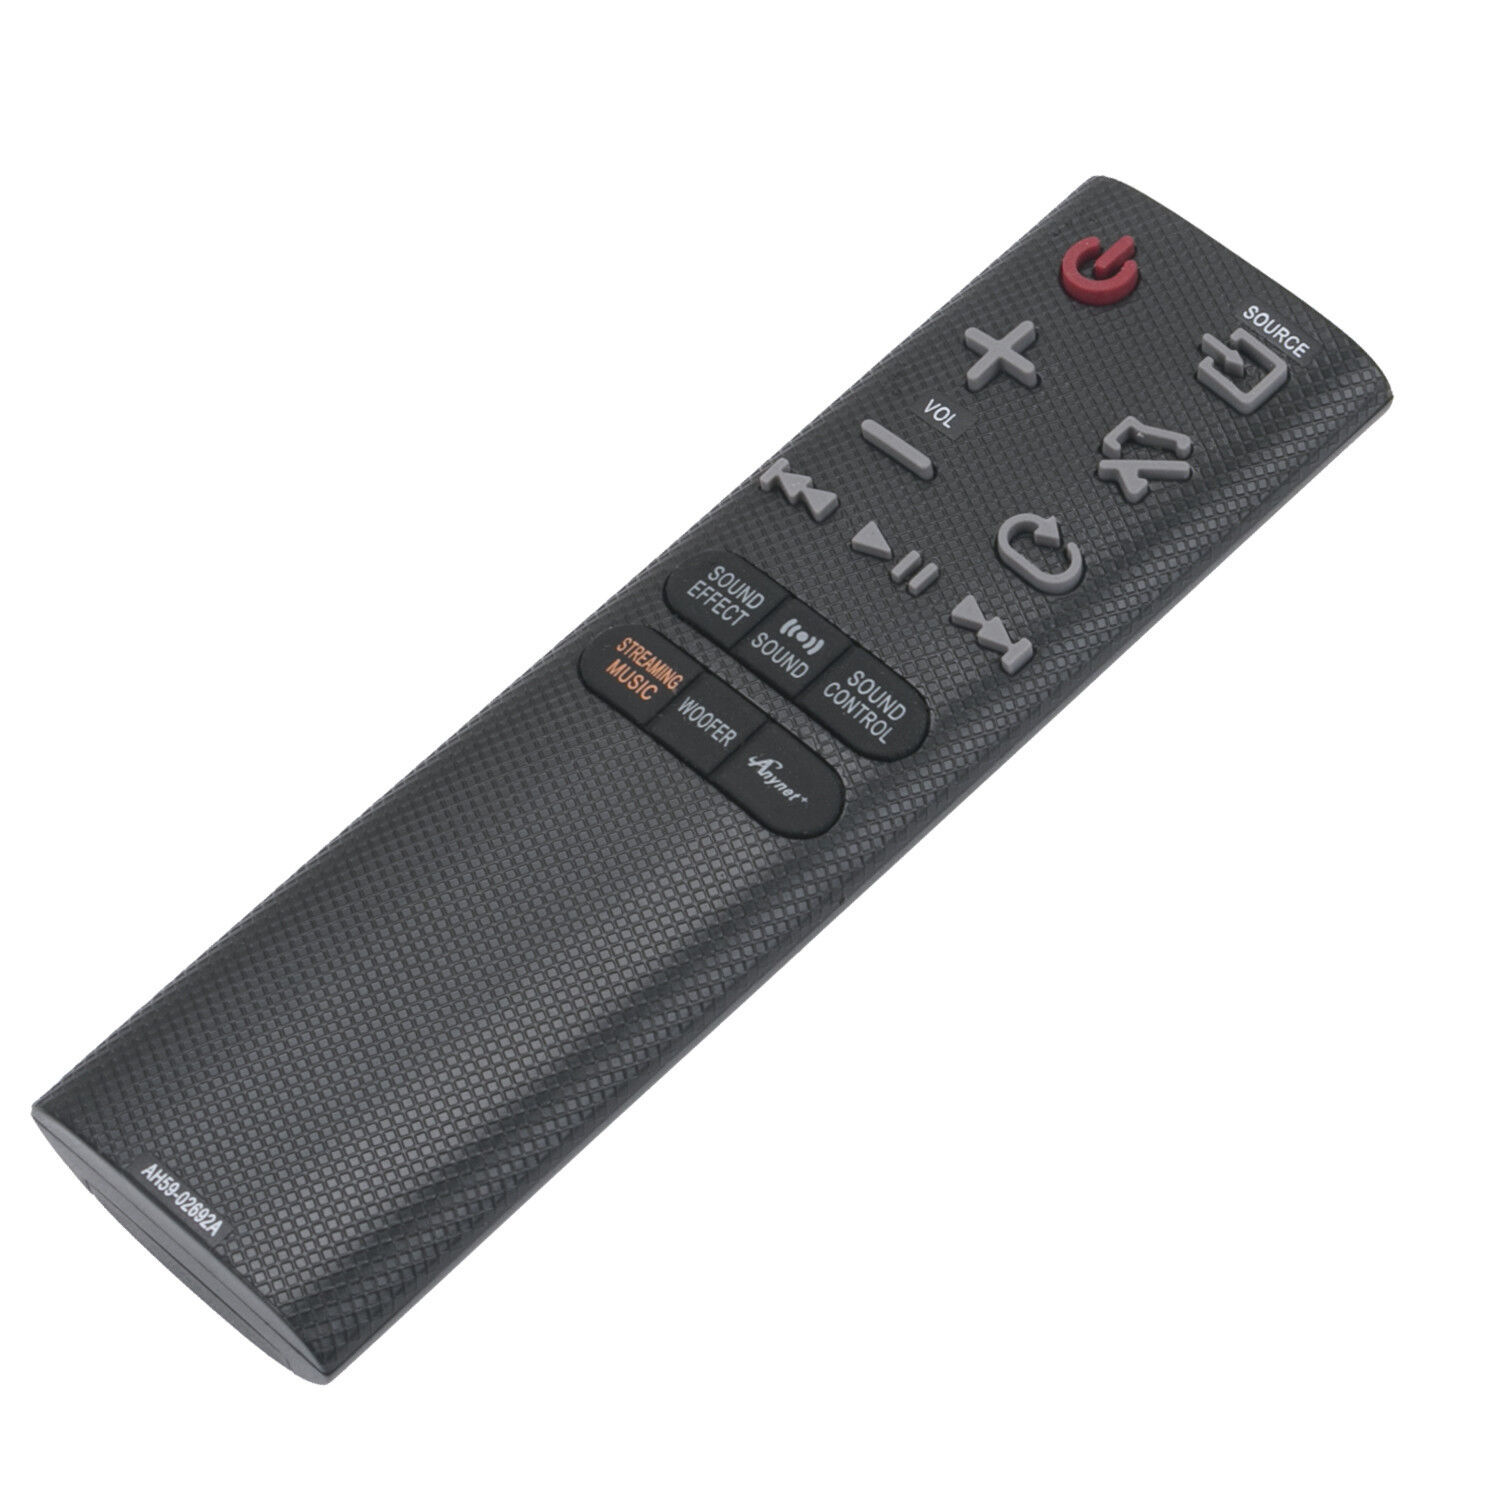 Primary image for Ah59-02692A Ah5902692A Remote For Samsung Home Theater Sound Bar